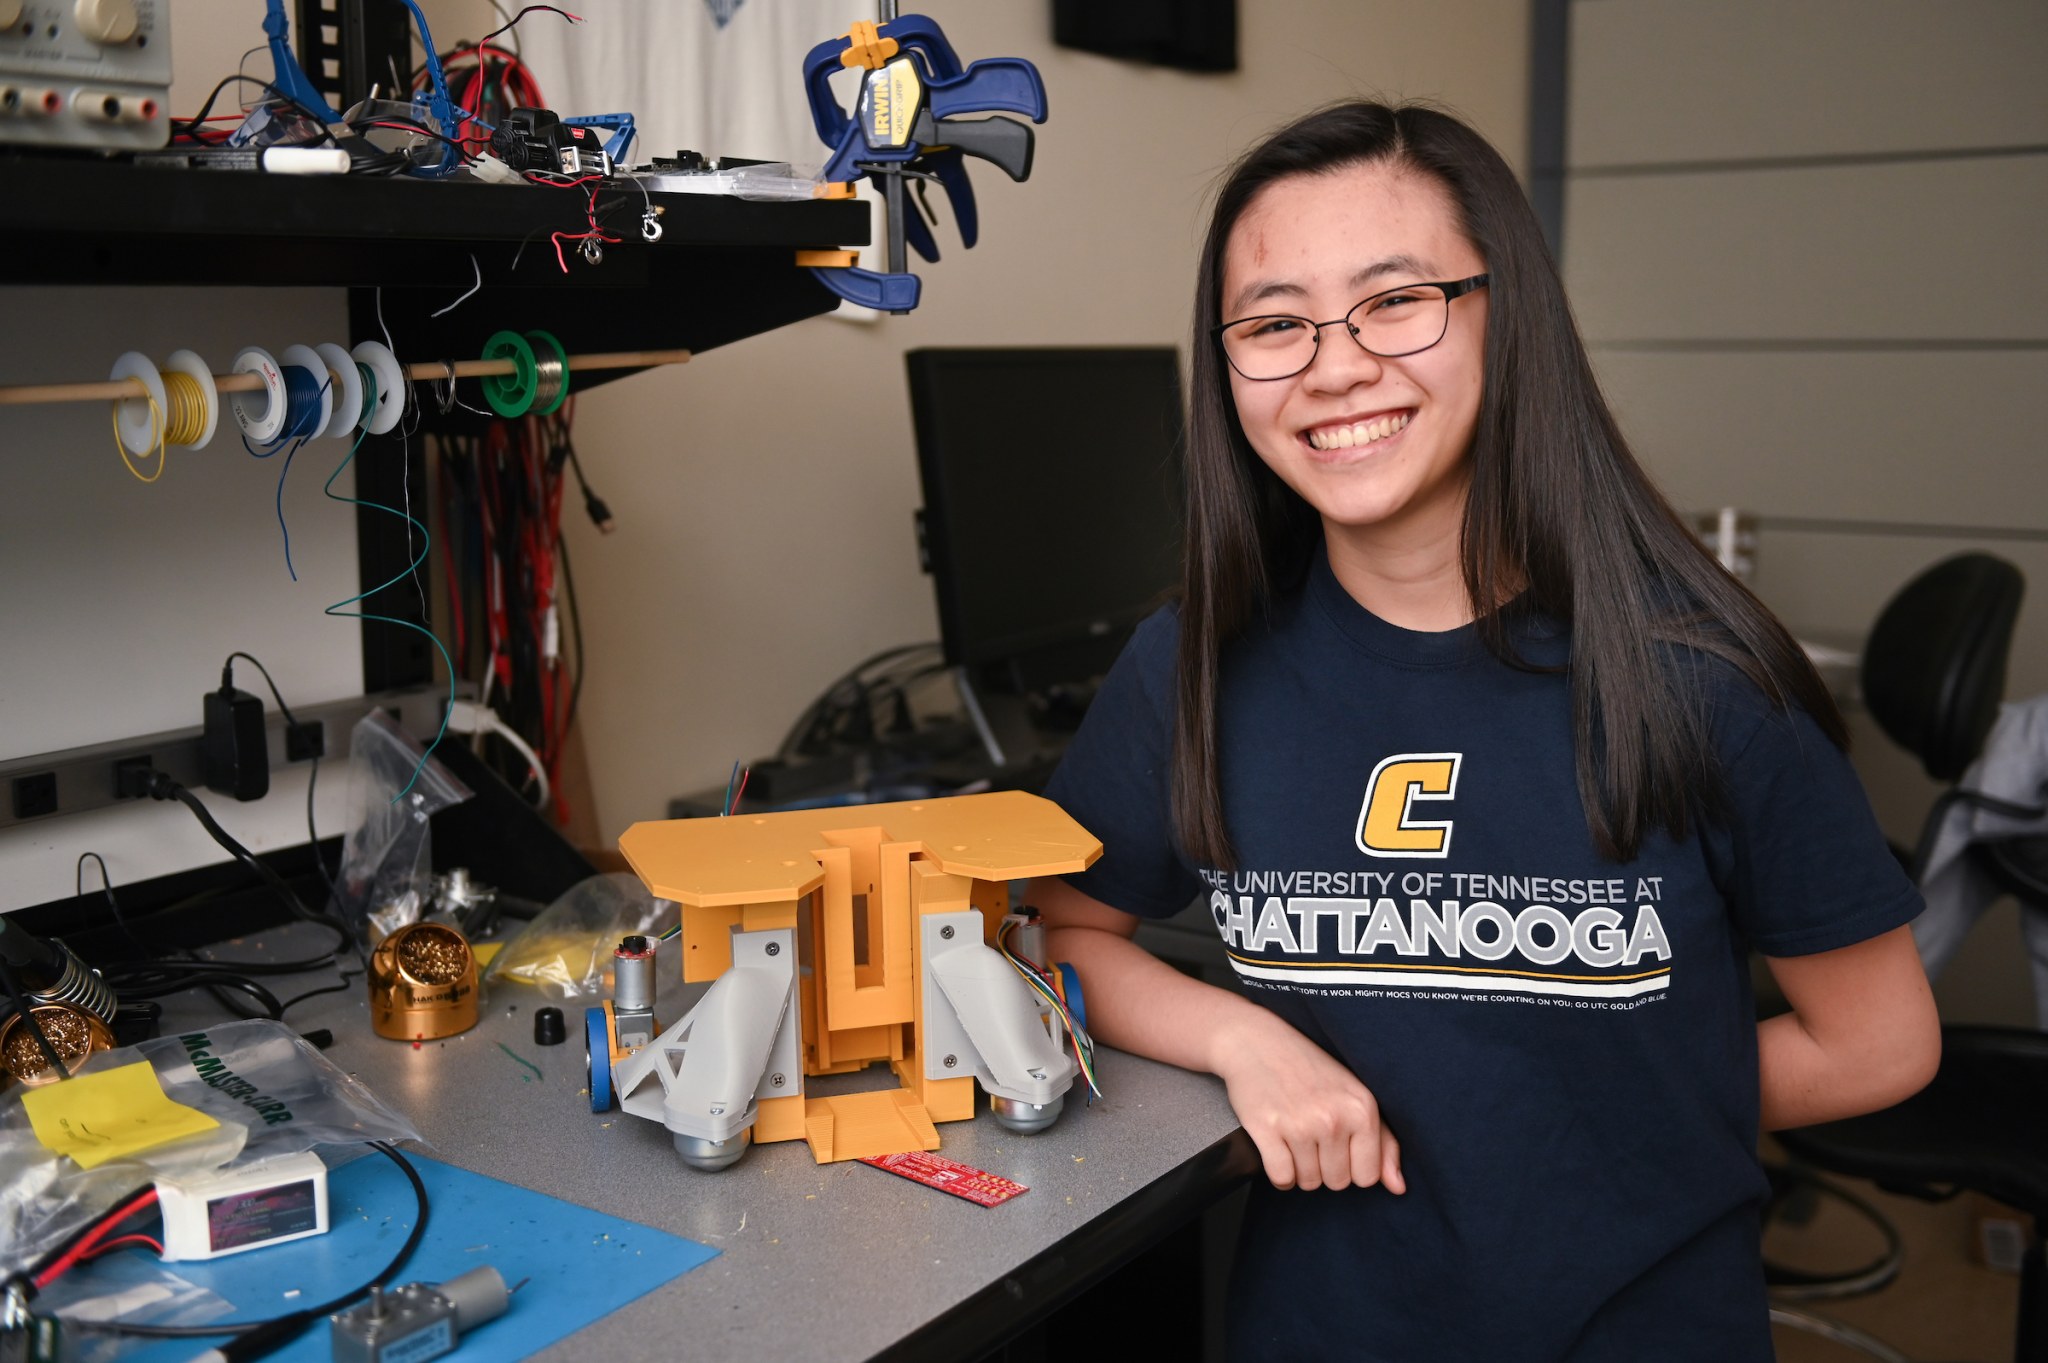 Caroline Lee attends one of the top electrical engineering schools in Tennessee